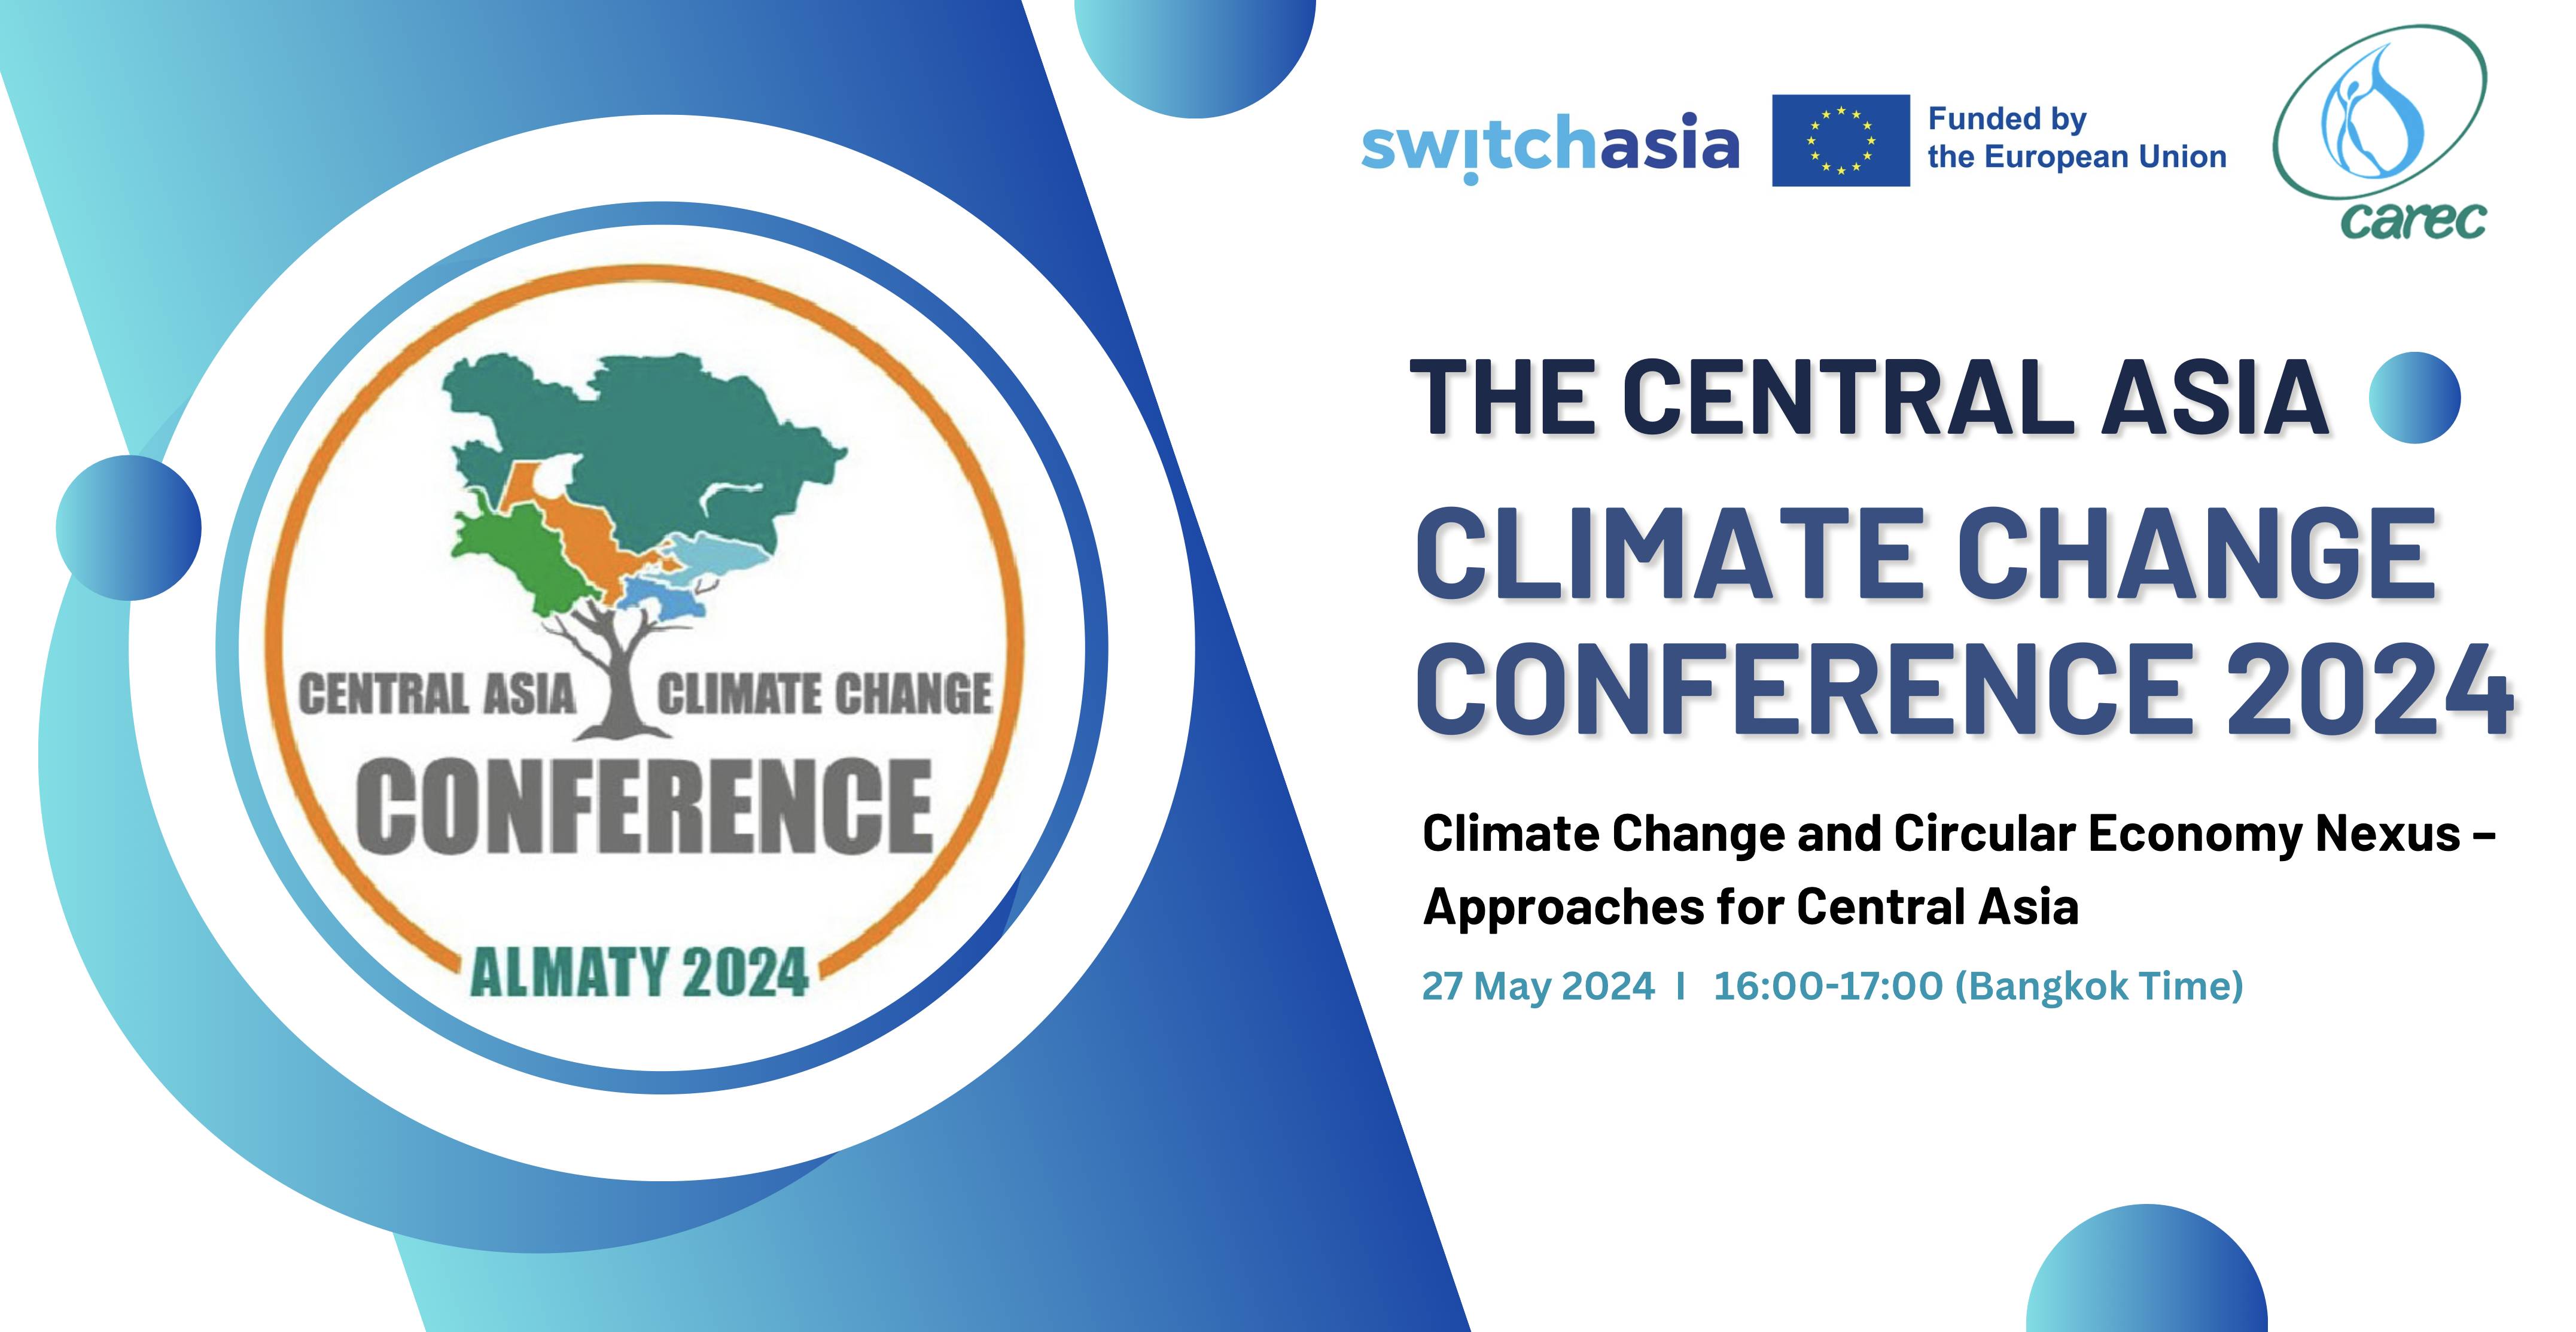 The Central Asia Climate Change Conference 2024